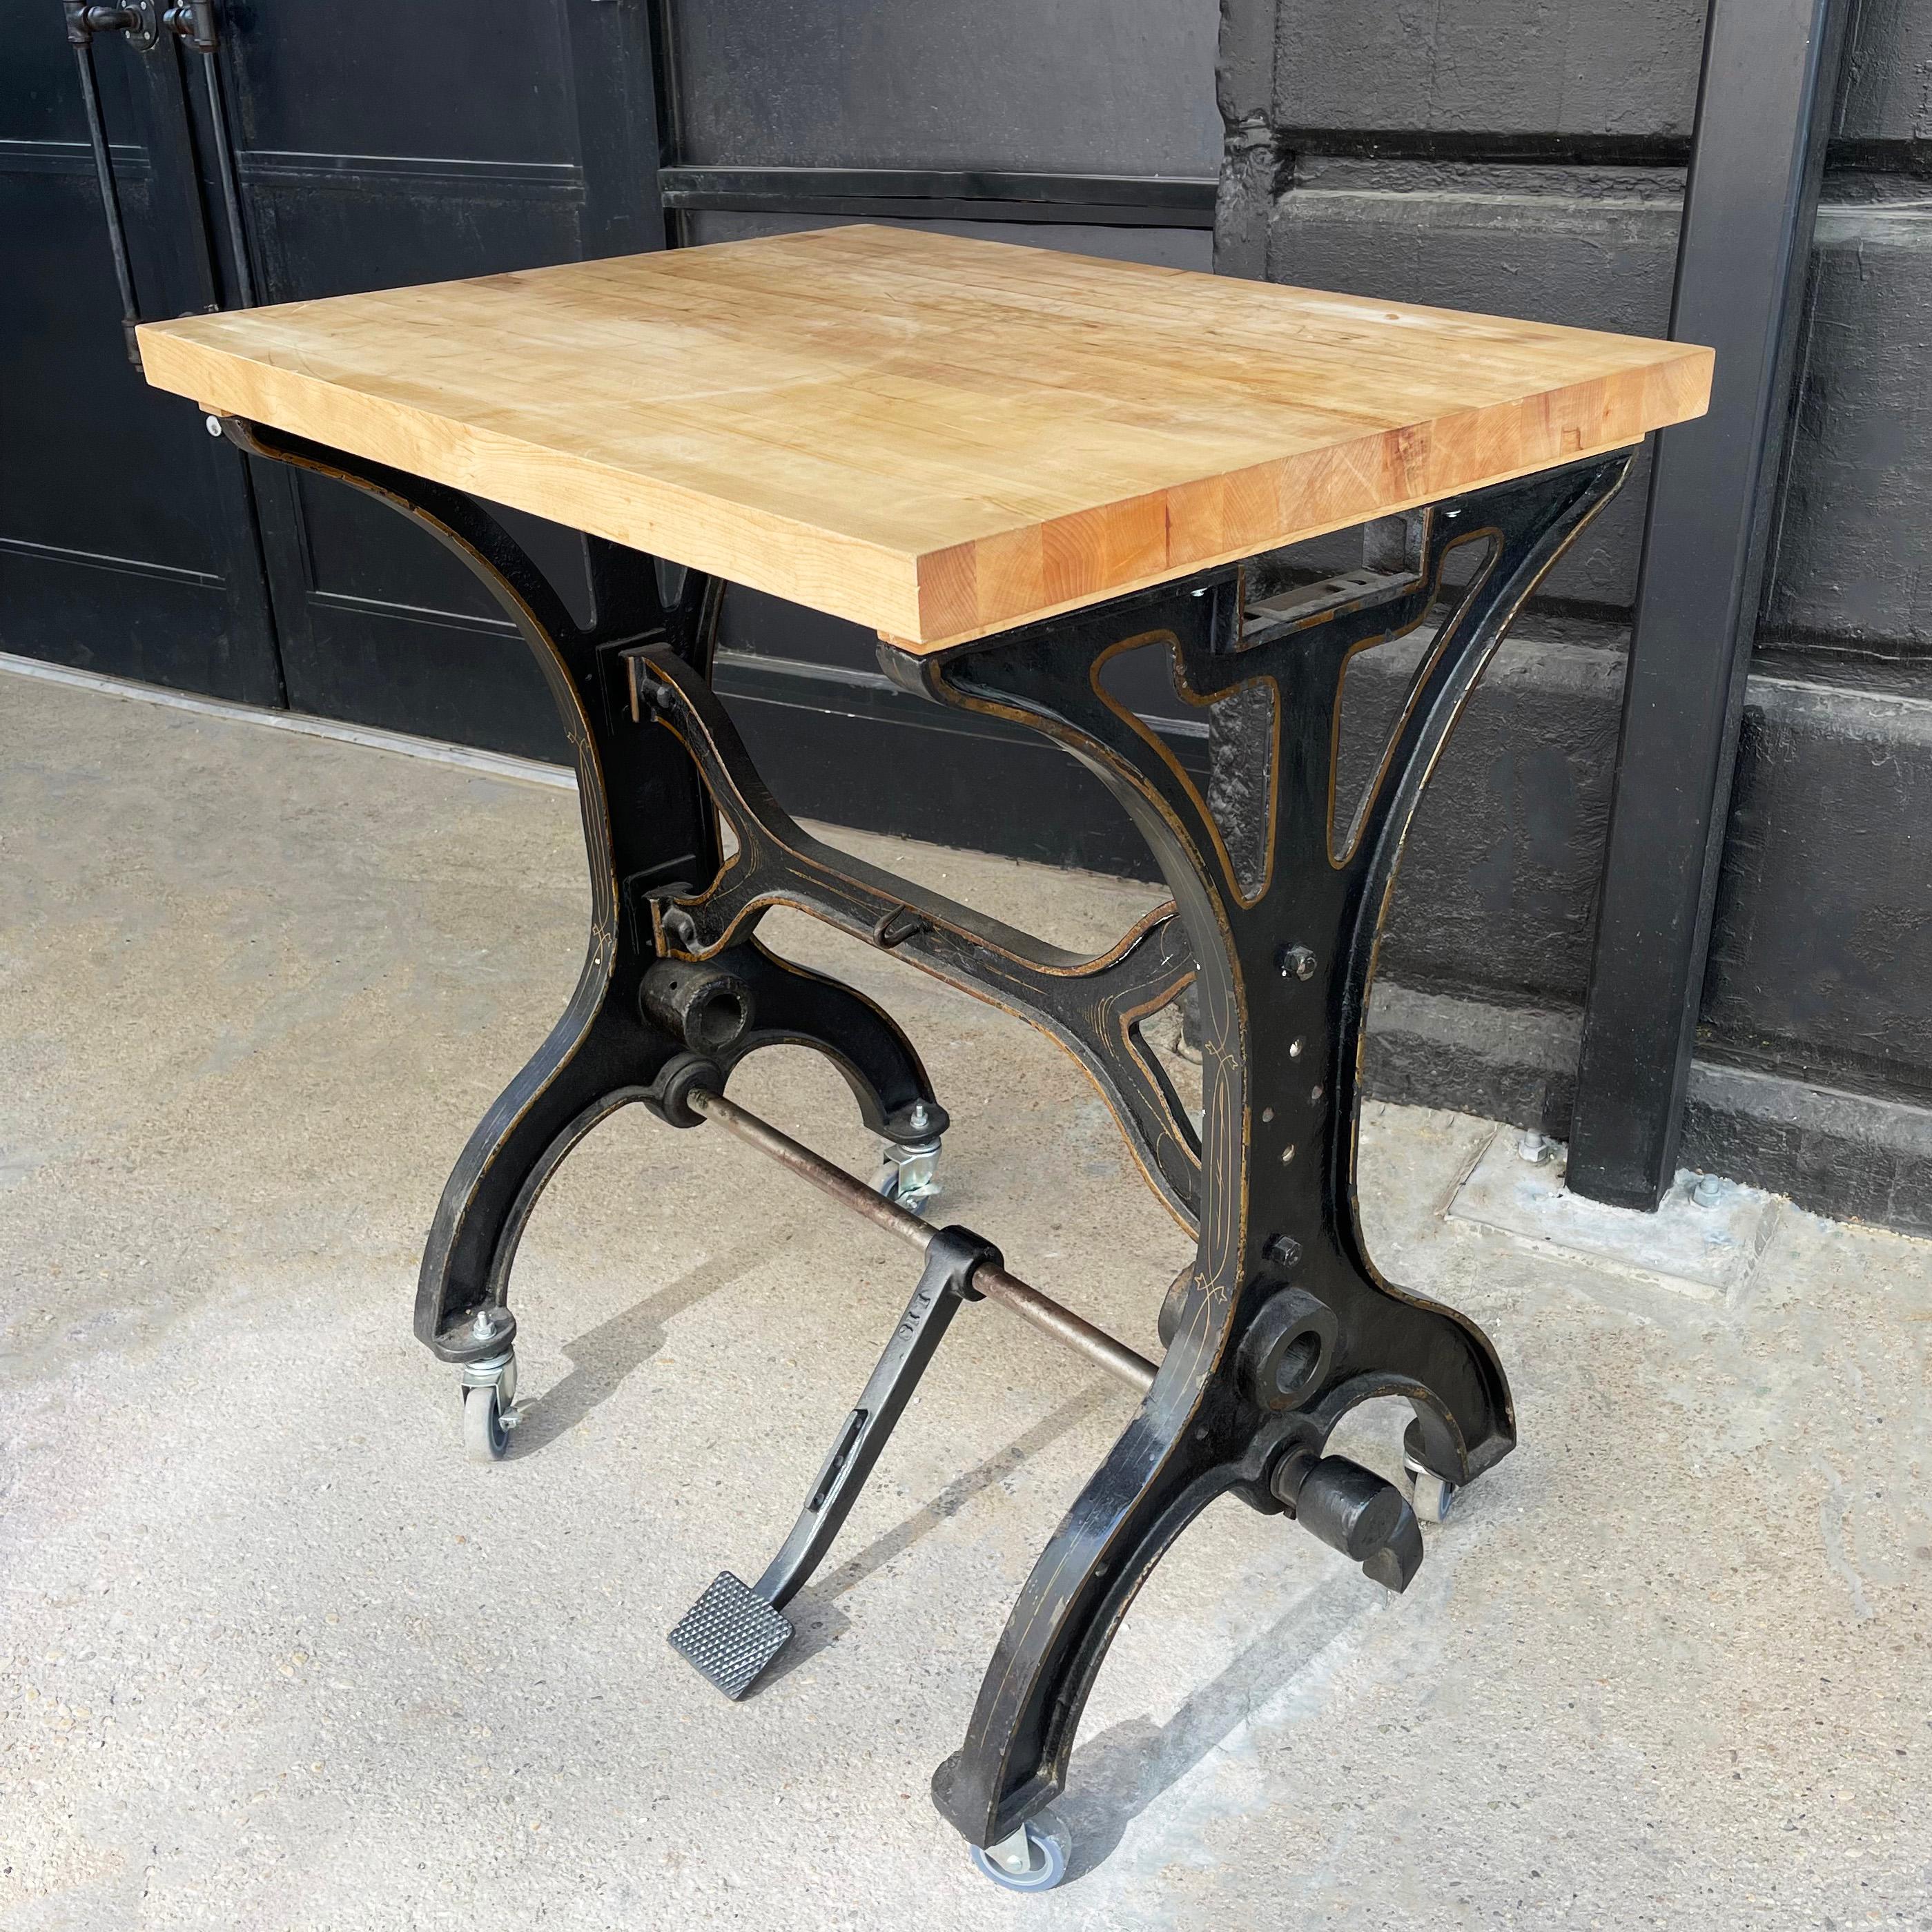 Turn of the 20th century, tall, industrial table features a japanned, cast iron machine base with brass toned filigree details with natural maple butcher block top. The table rolls on casters that are removeable lowering the table by 4 inches.